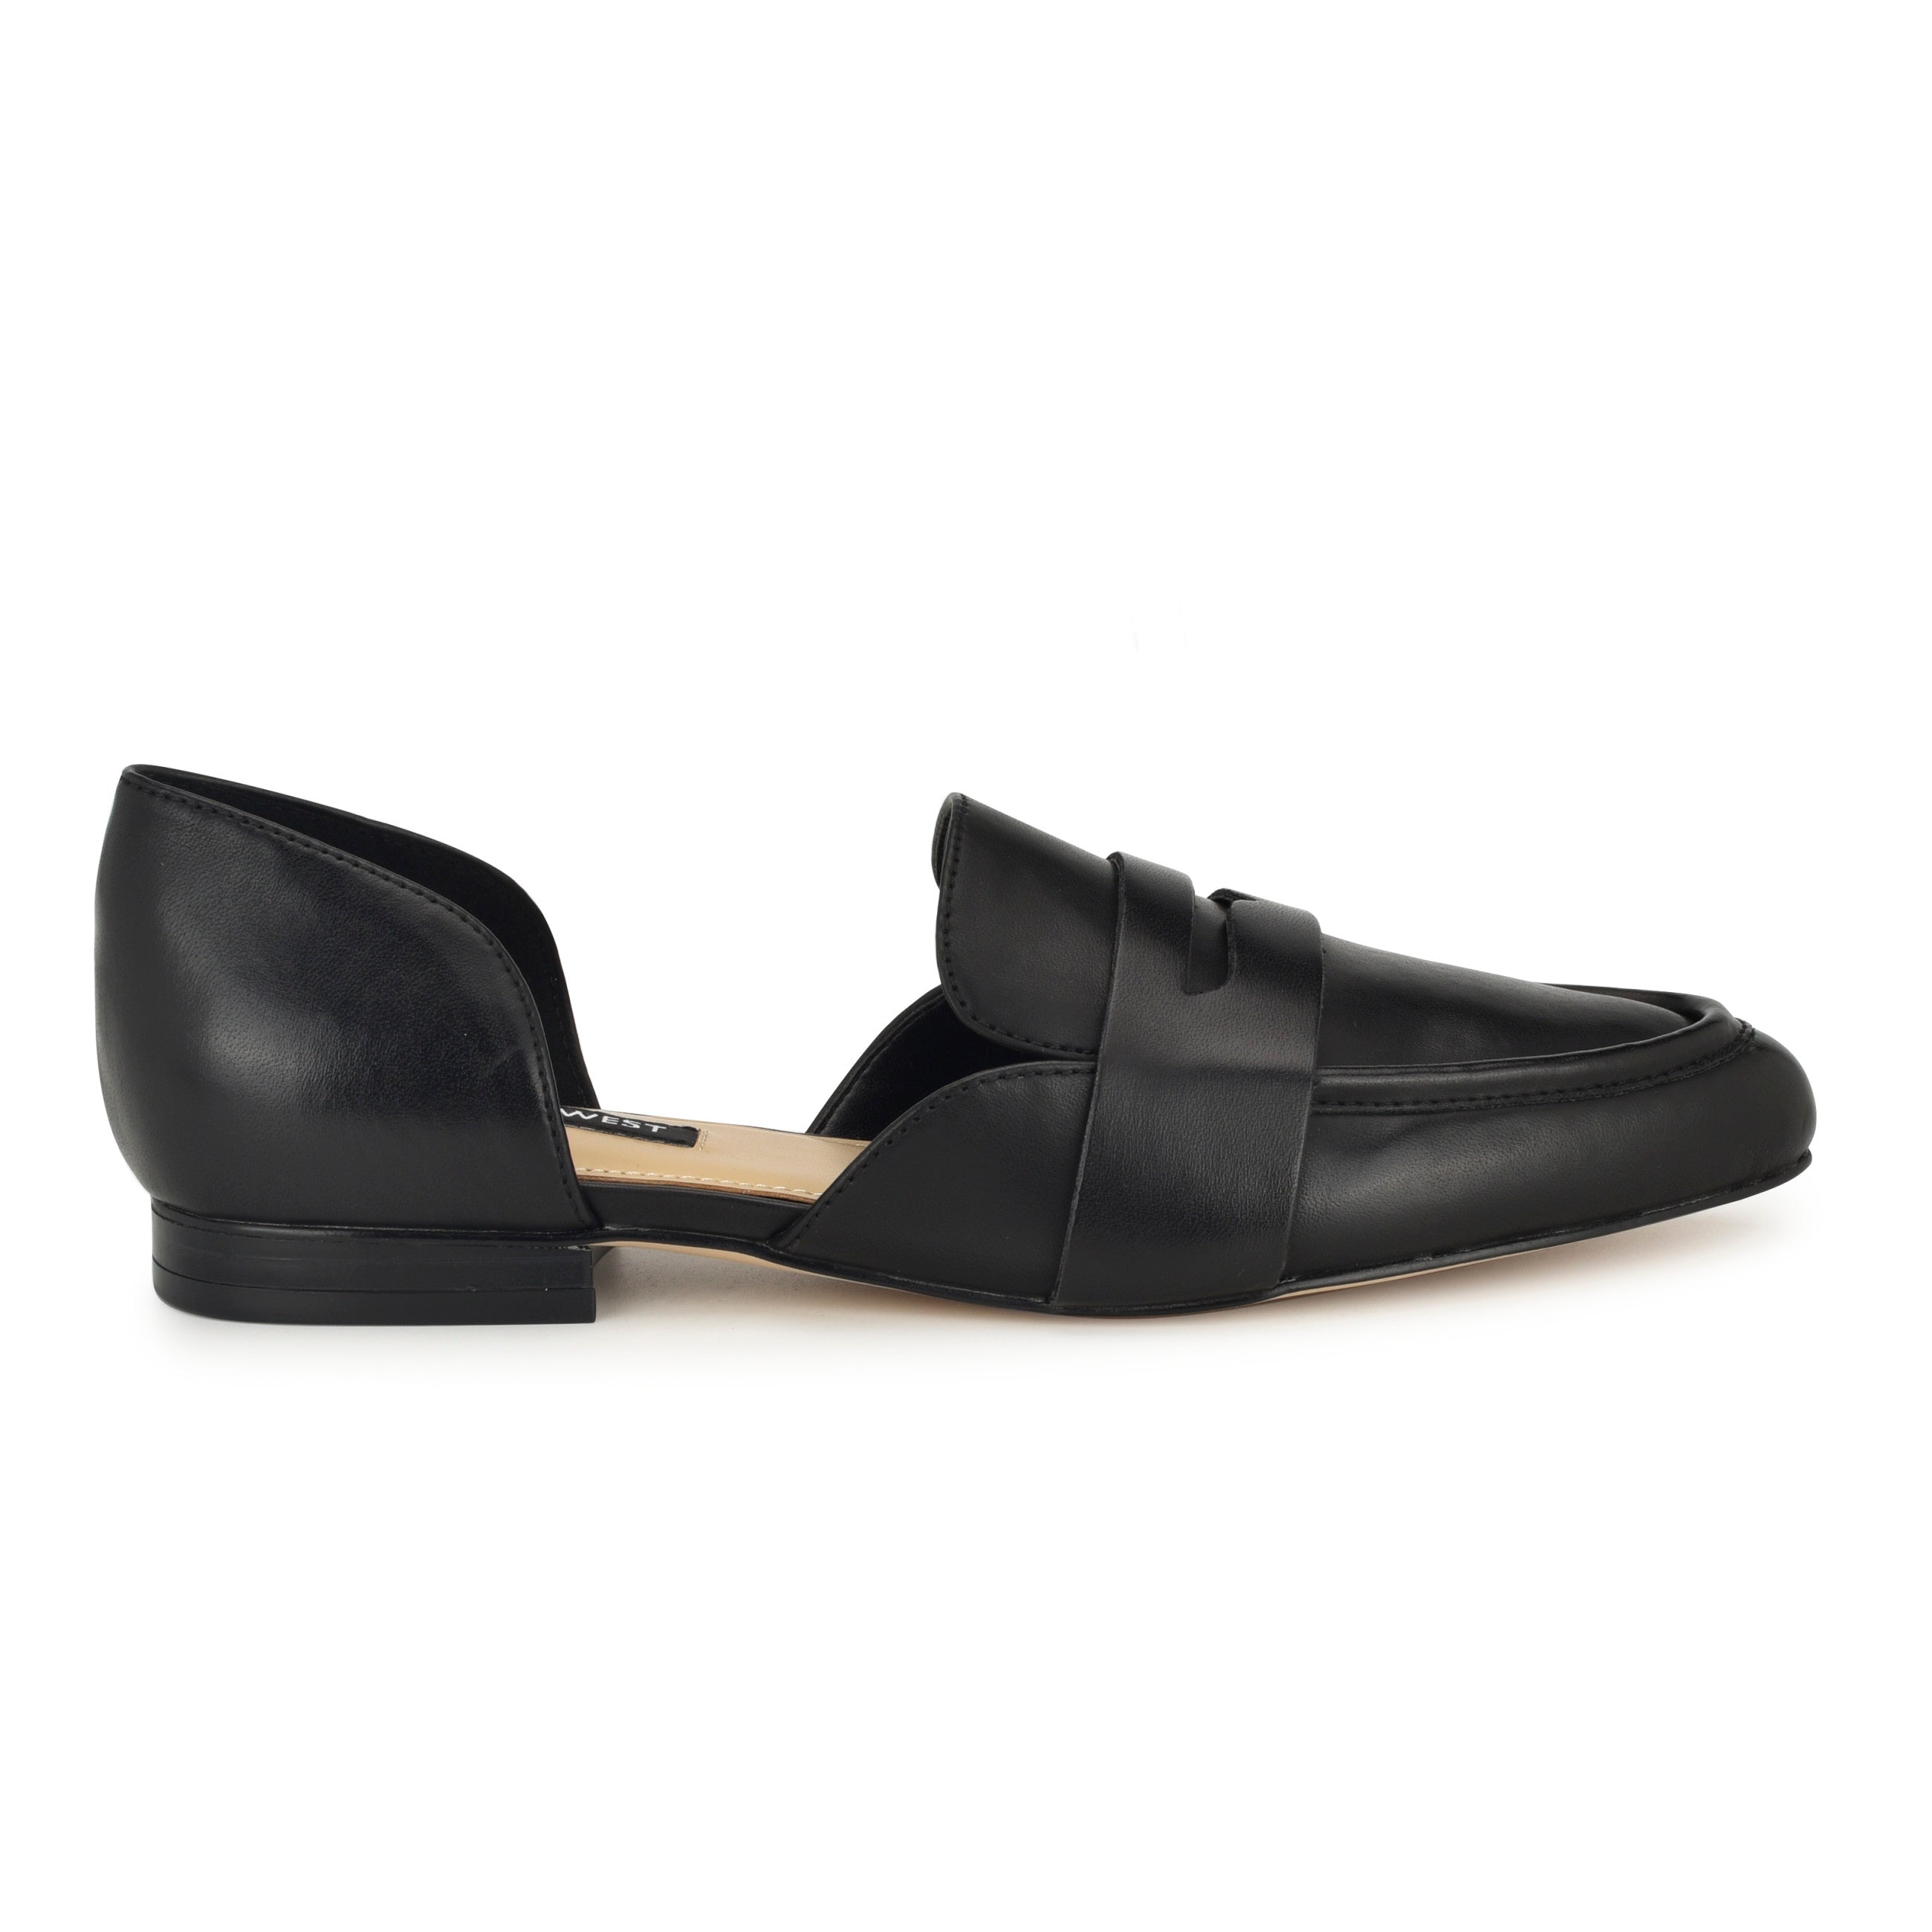 Gorel d'Orsay Loafers